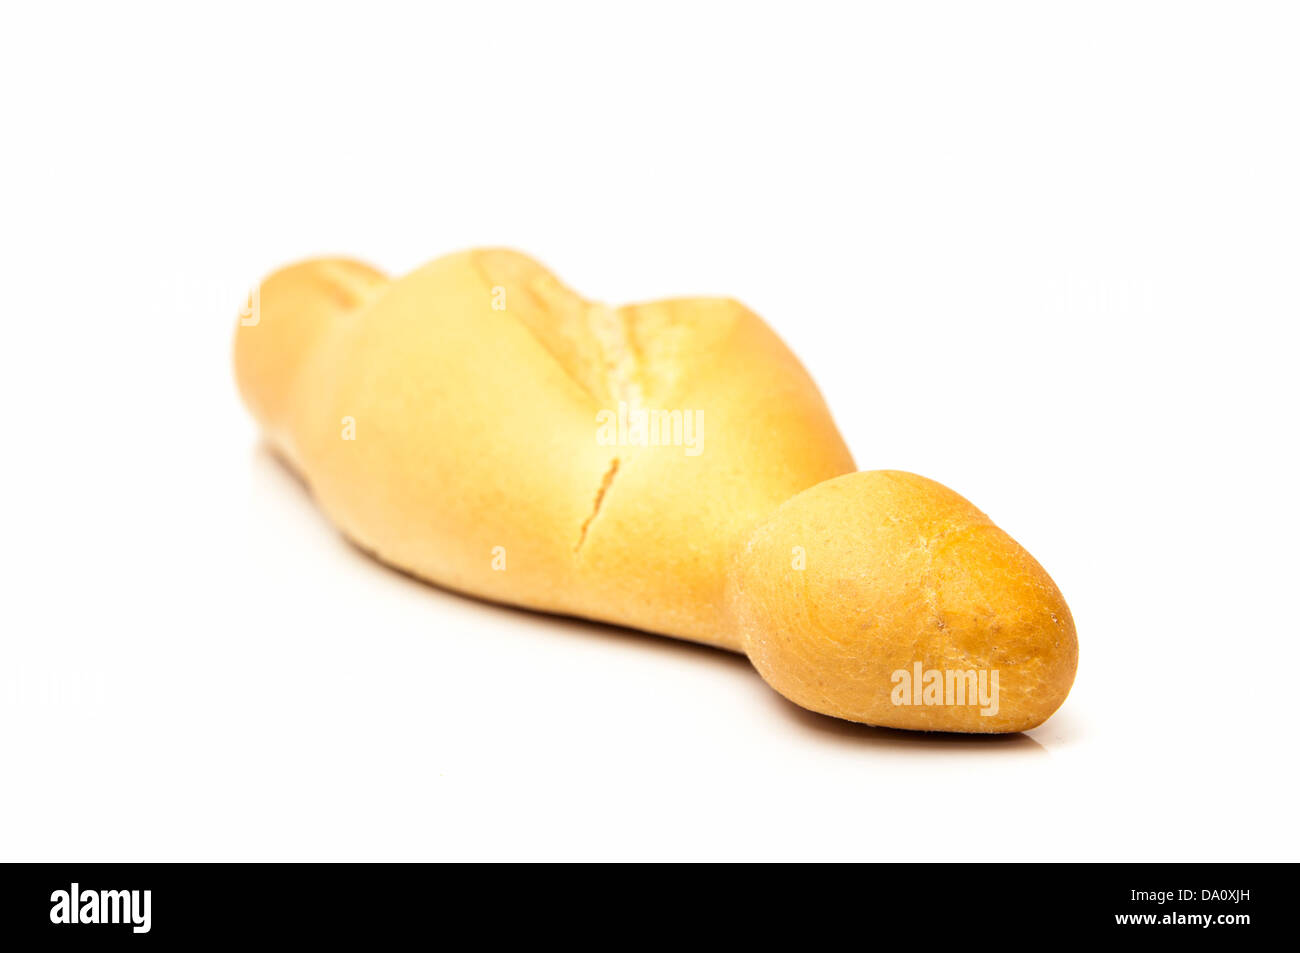 loaf of bread on a white background Stock Photo